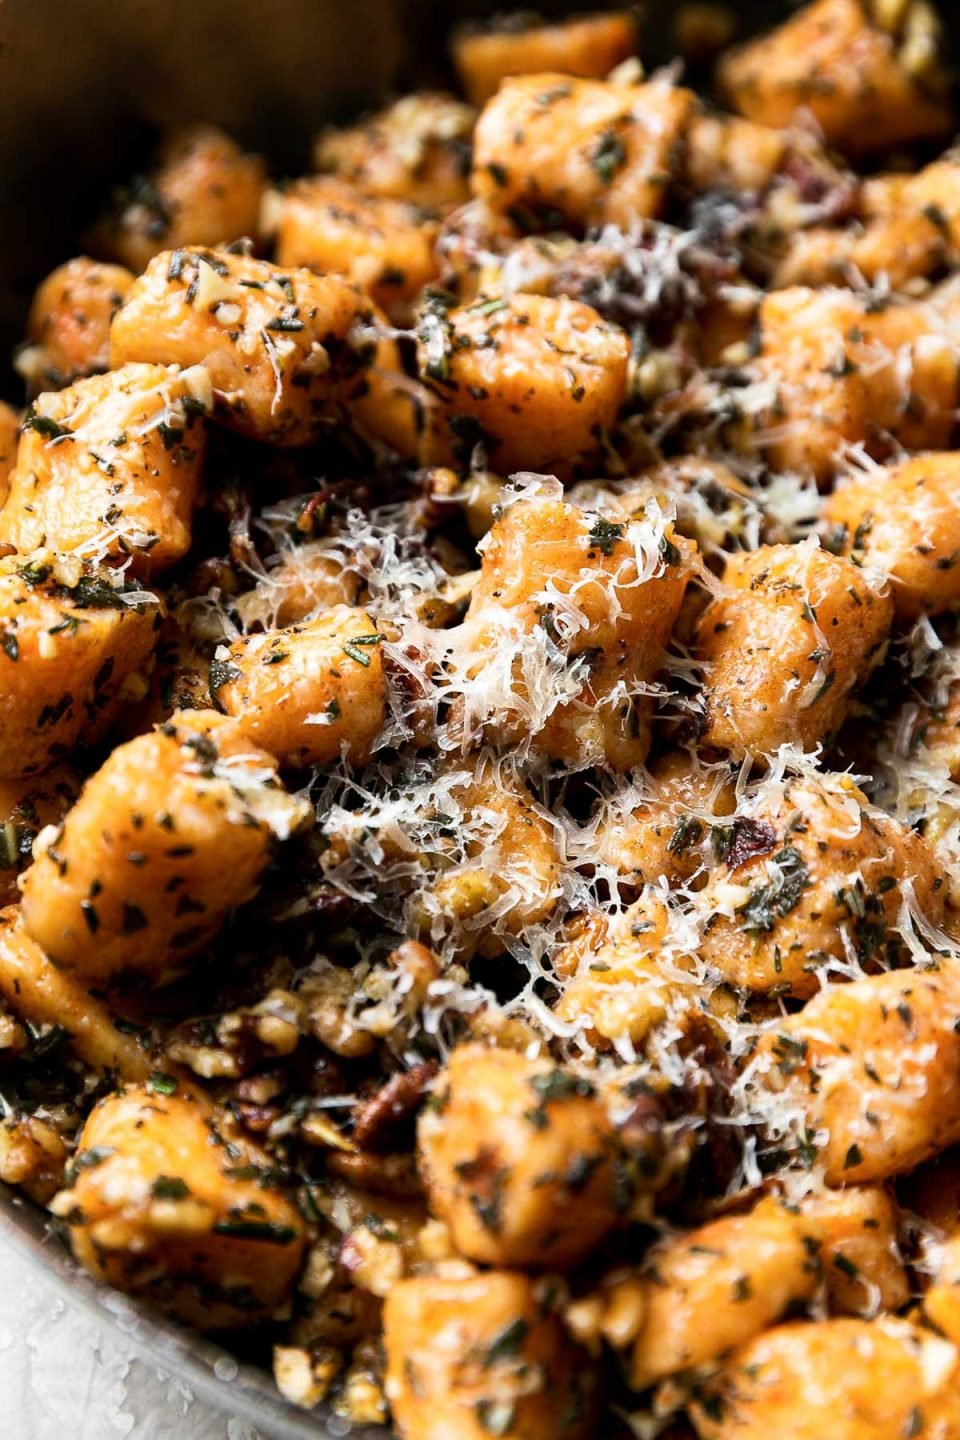 A side angle shot of Sweet Potato Gnocchi with Garlic Herb Brown Butter sauce in a metal sauce pan. The gnocchi is garnished with freshly grated parmesan cheese and the saucepan sits atop a creamy white textured surface.